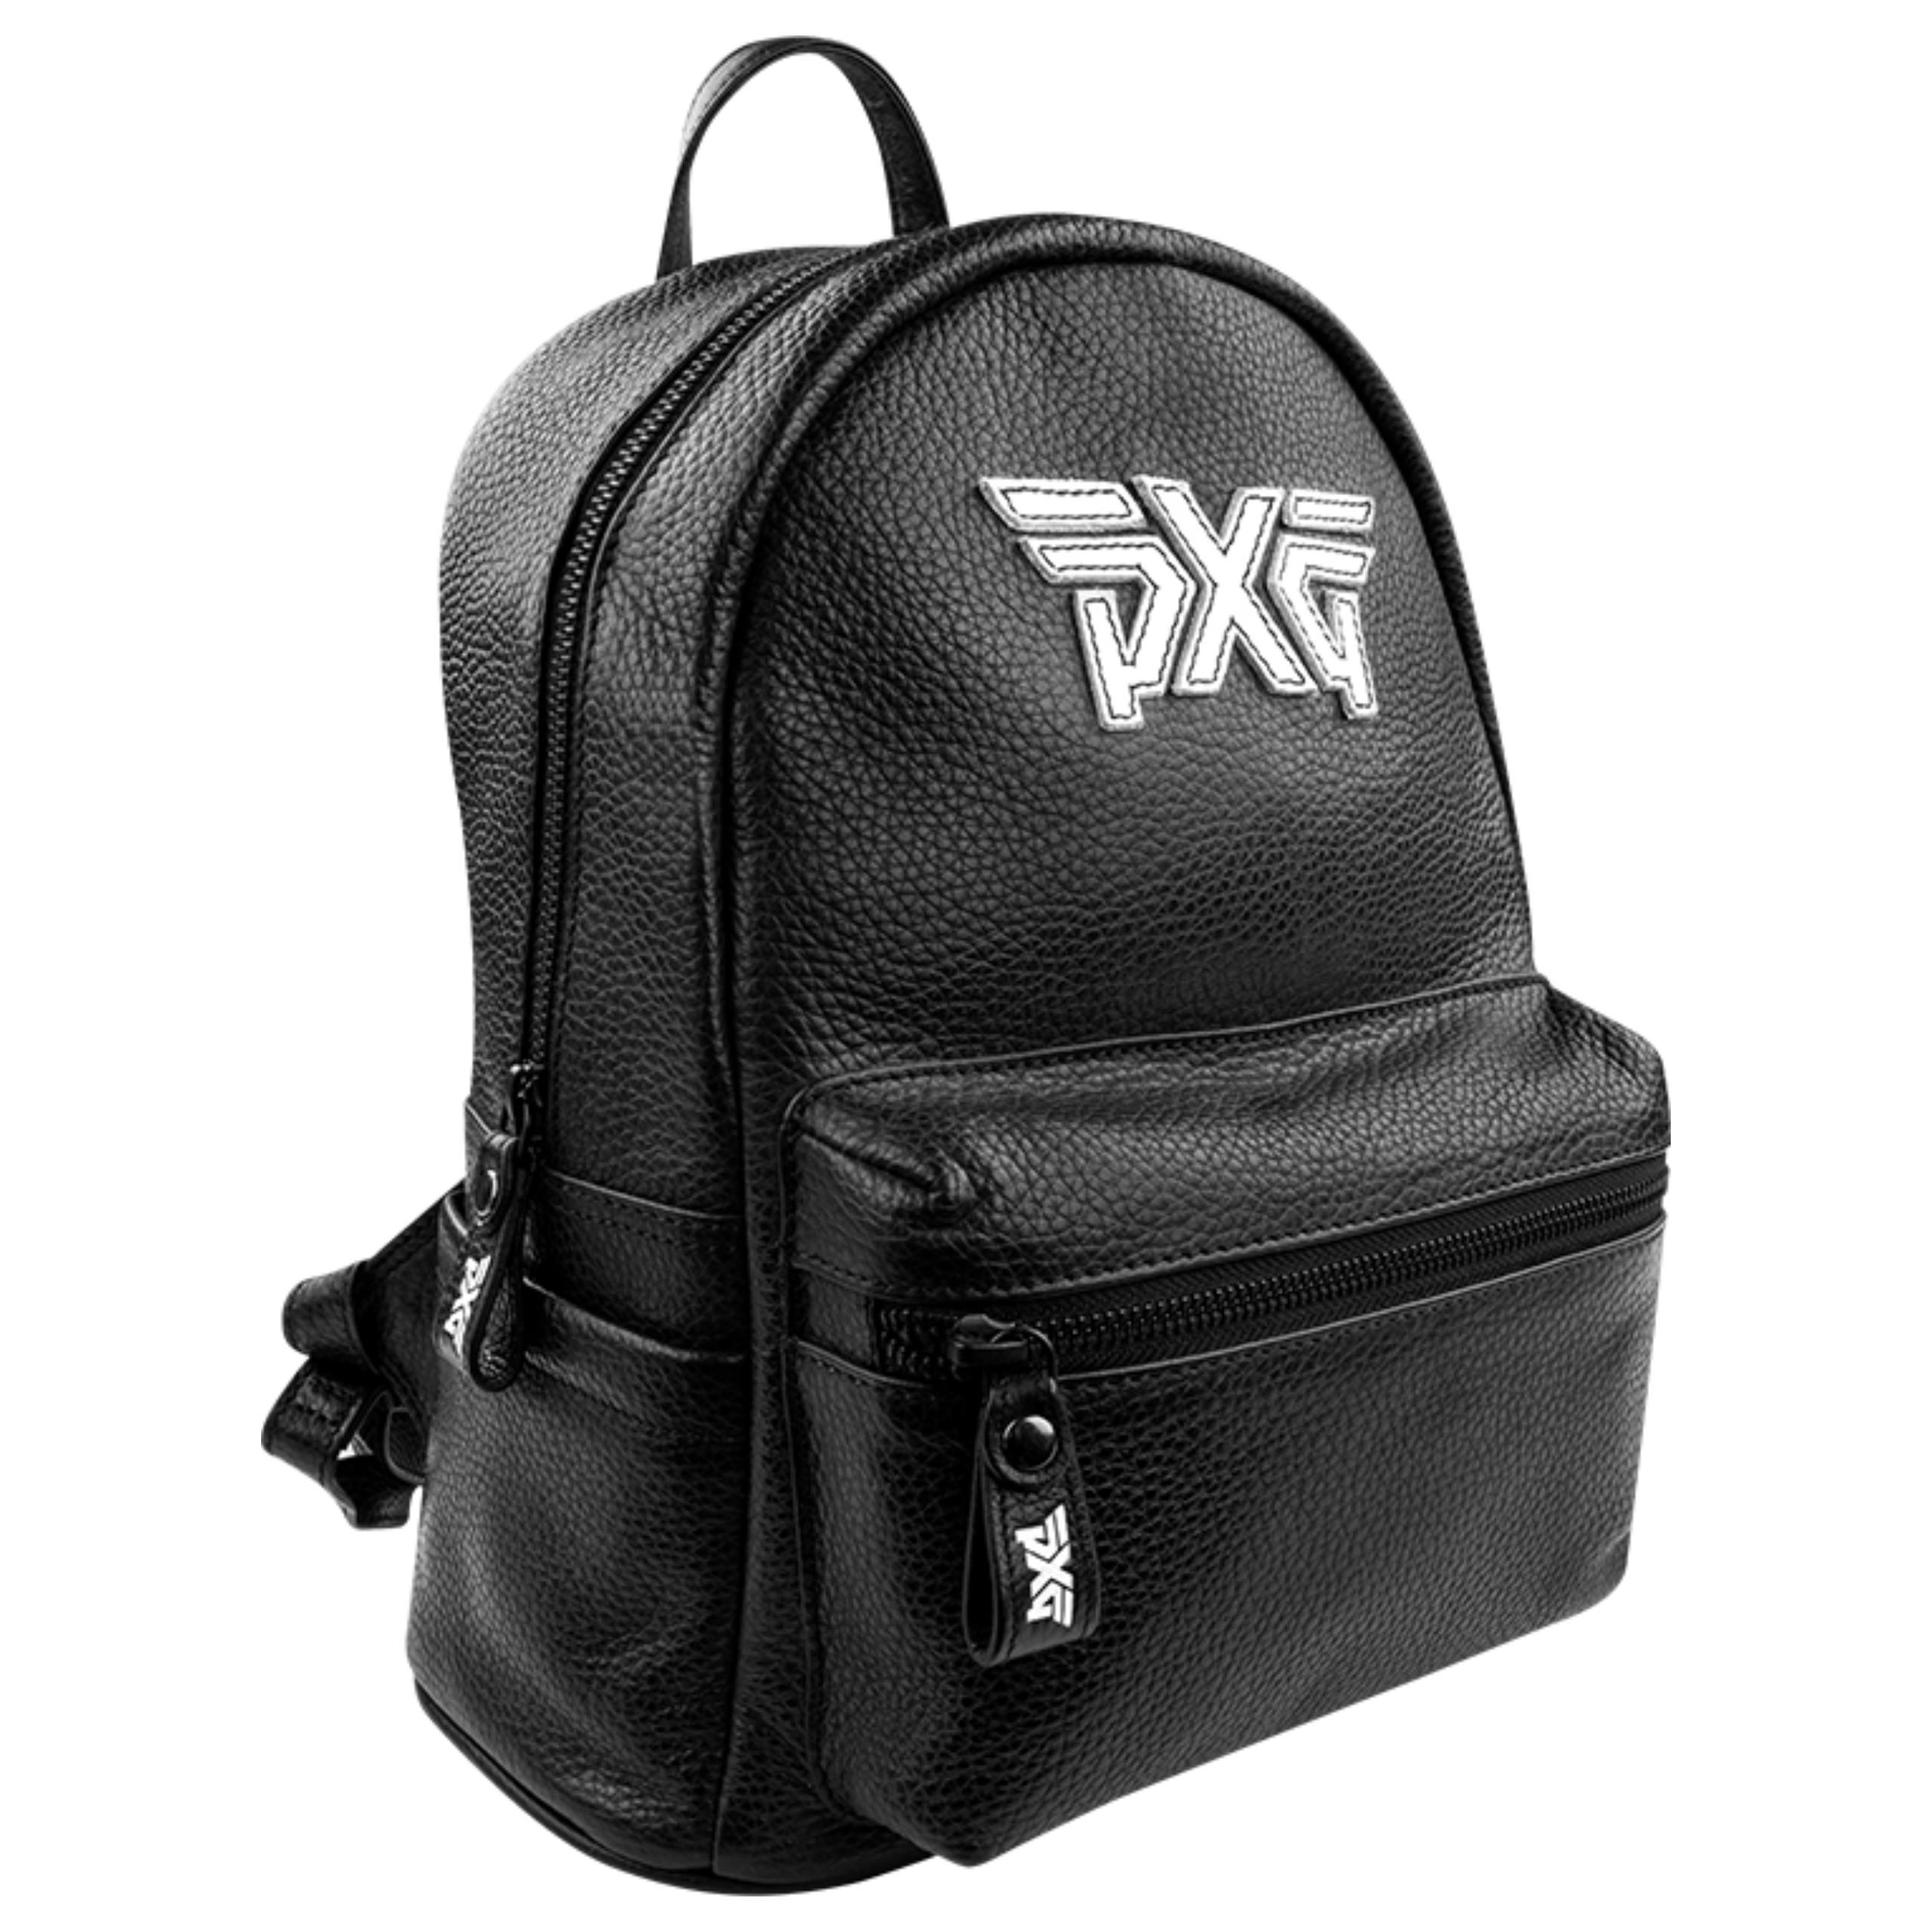 PXG Backpack